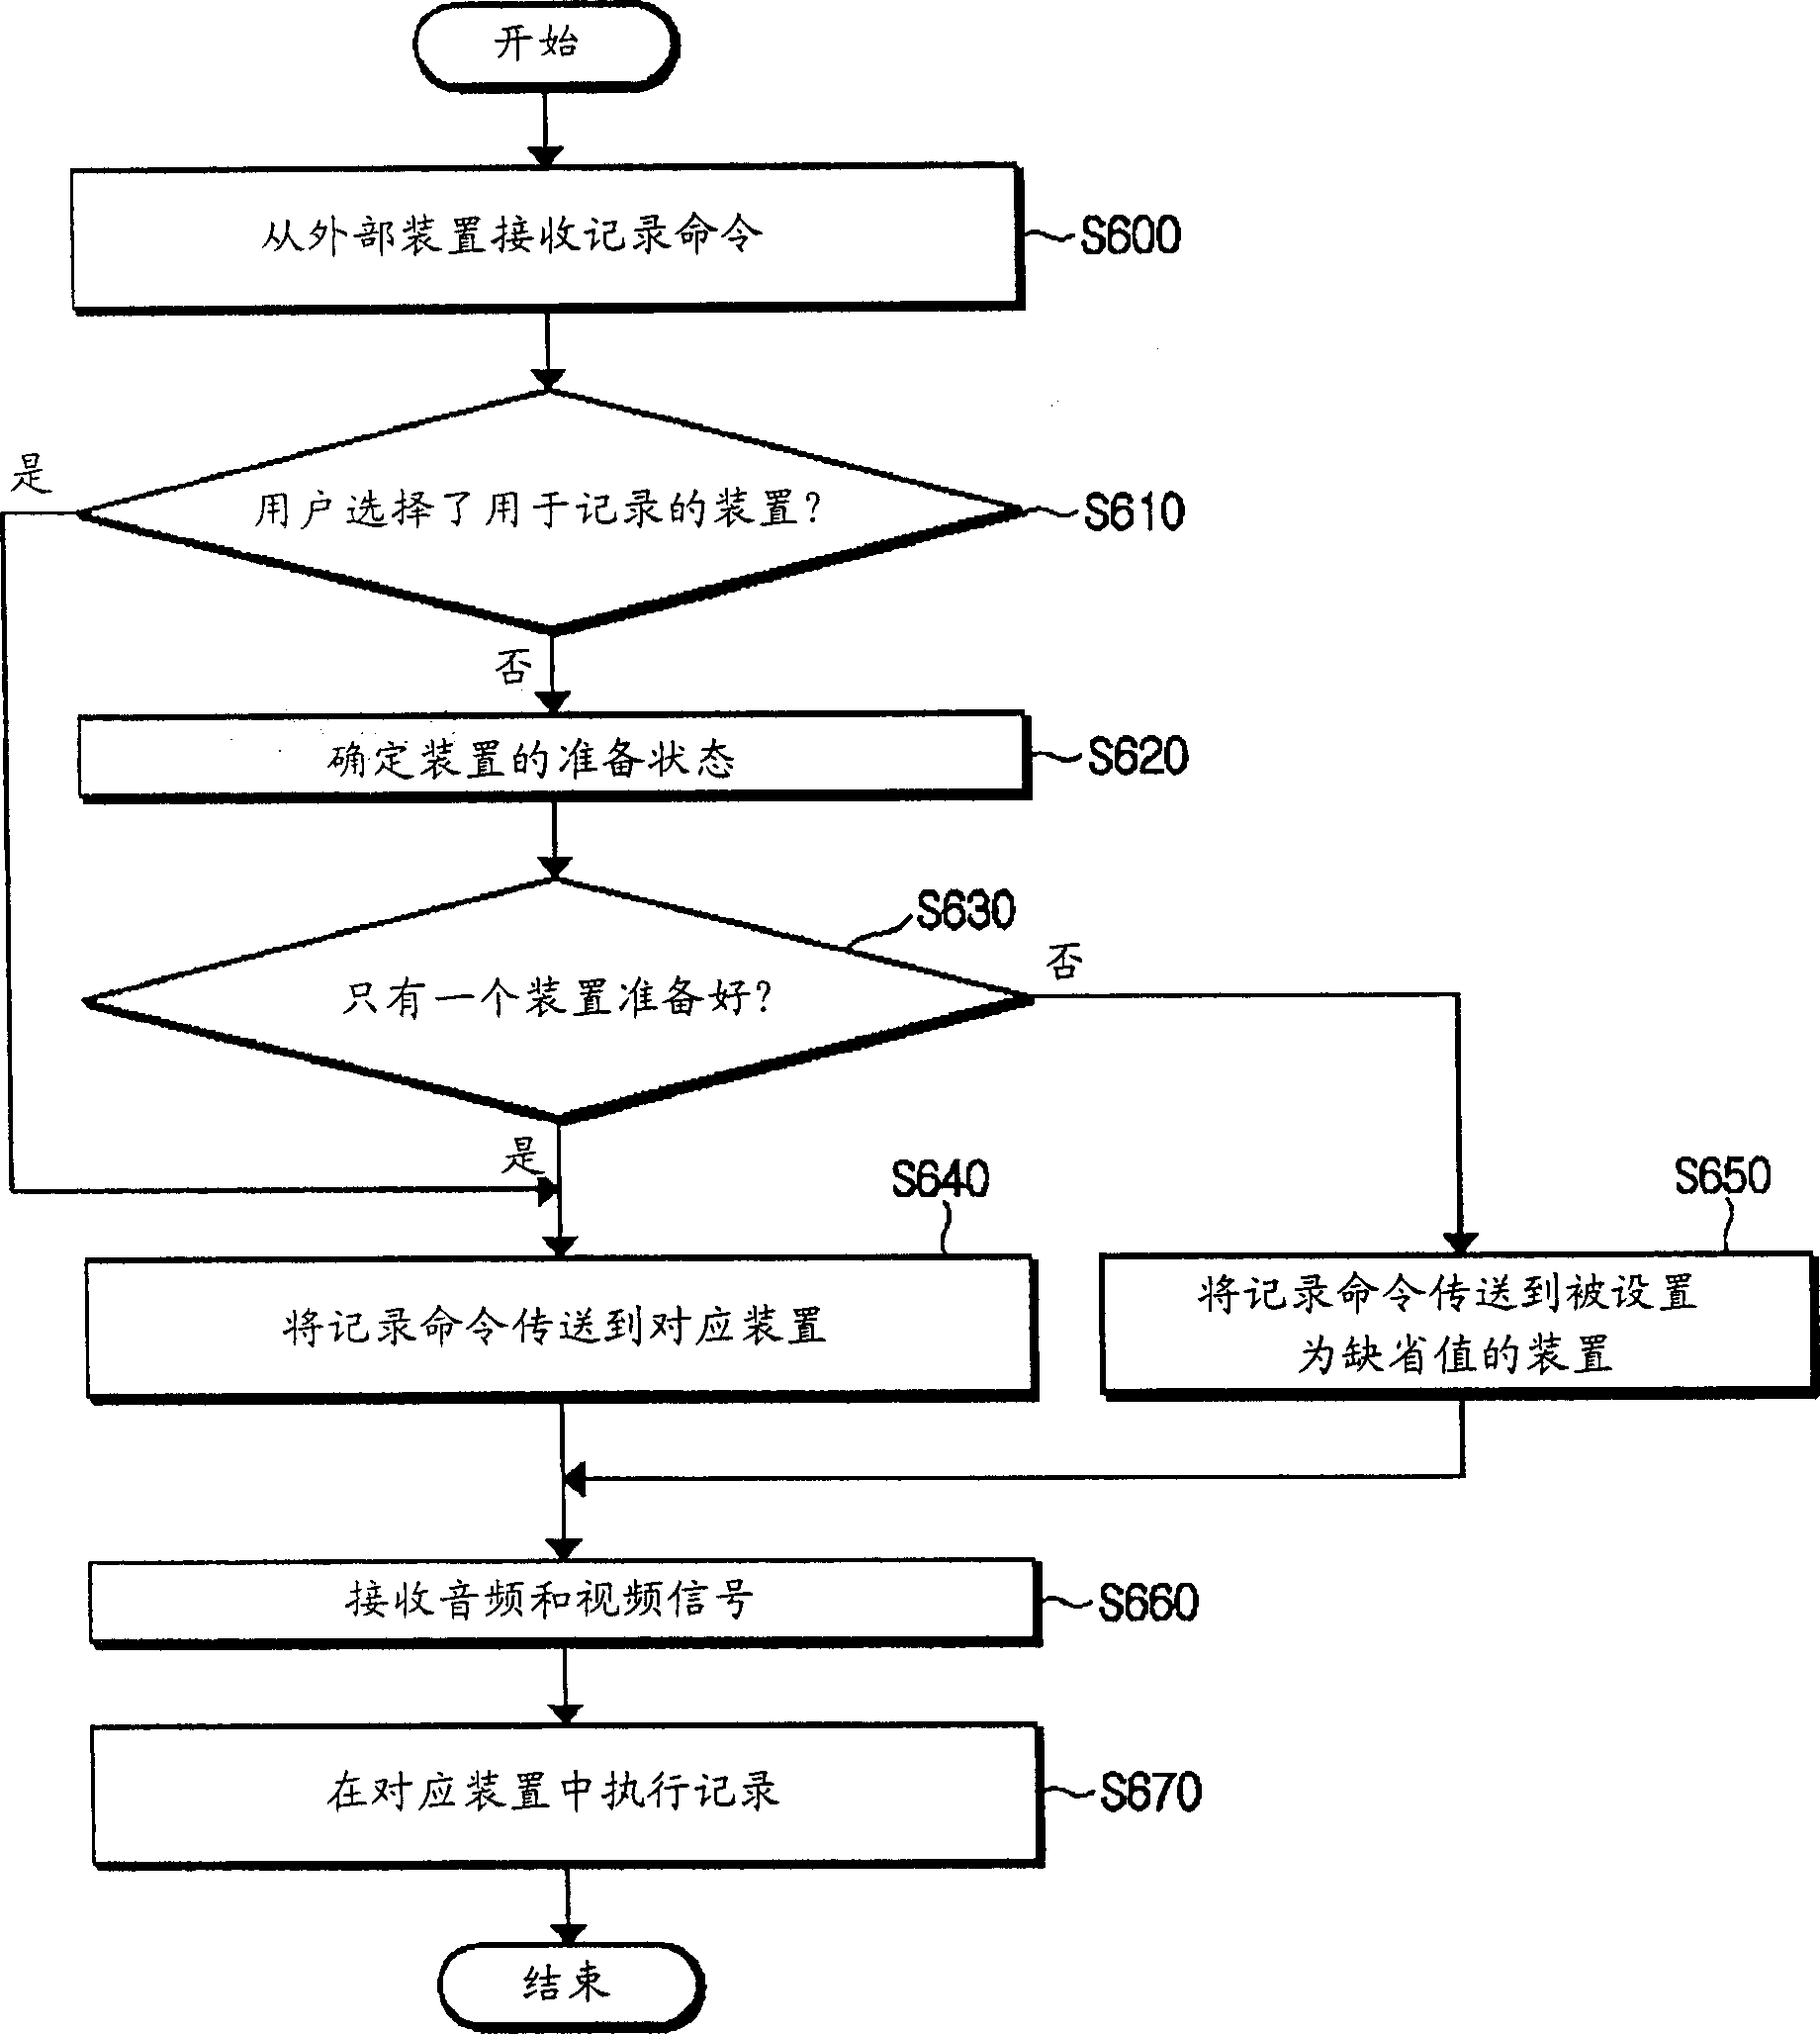 Multi function apparatus and control method thereof